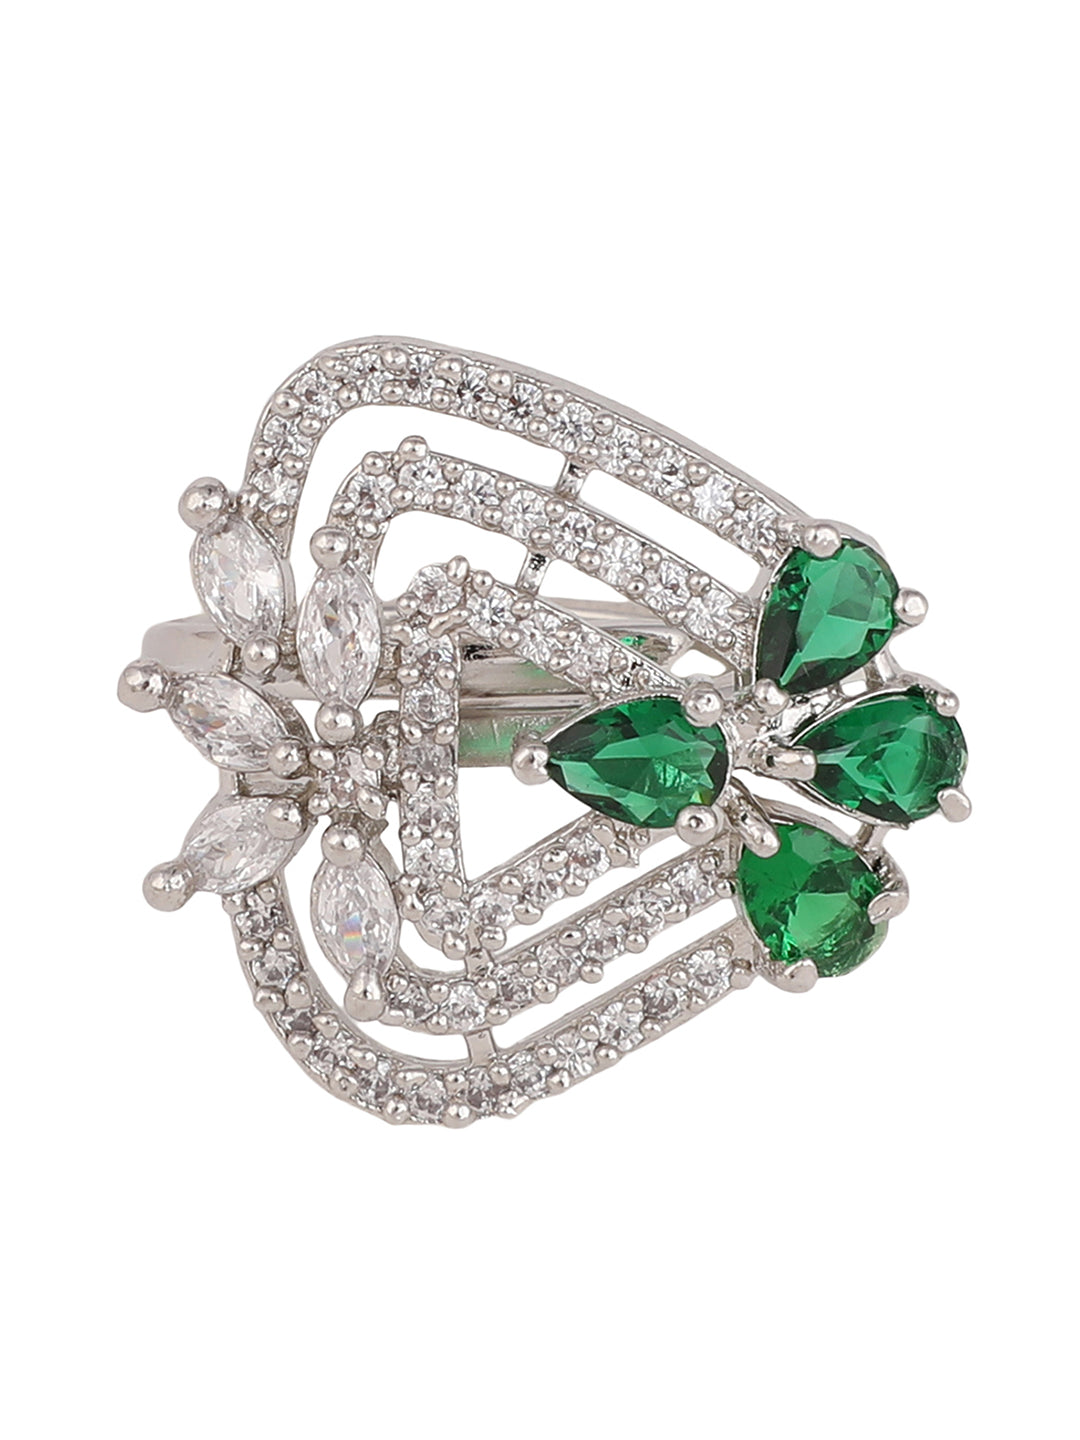 Women's Silver-Plated Green & White Ad-Studded Adjustable Finger Ring - Anikas Creation